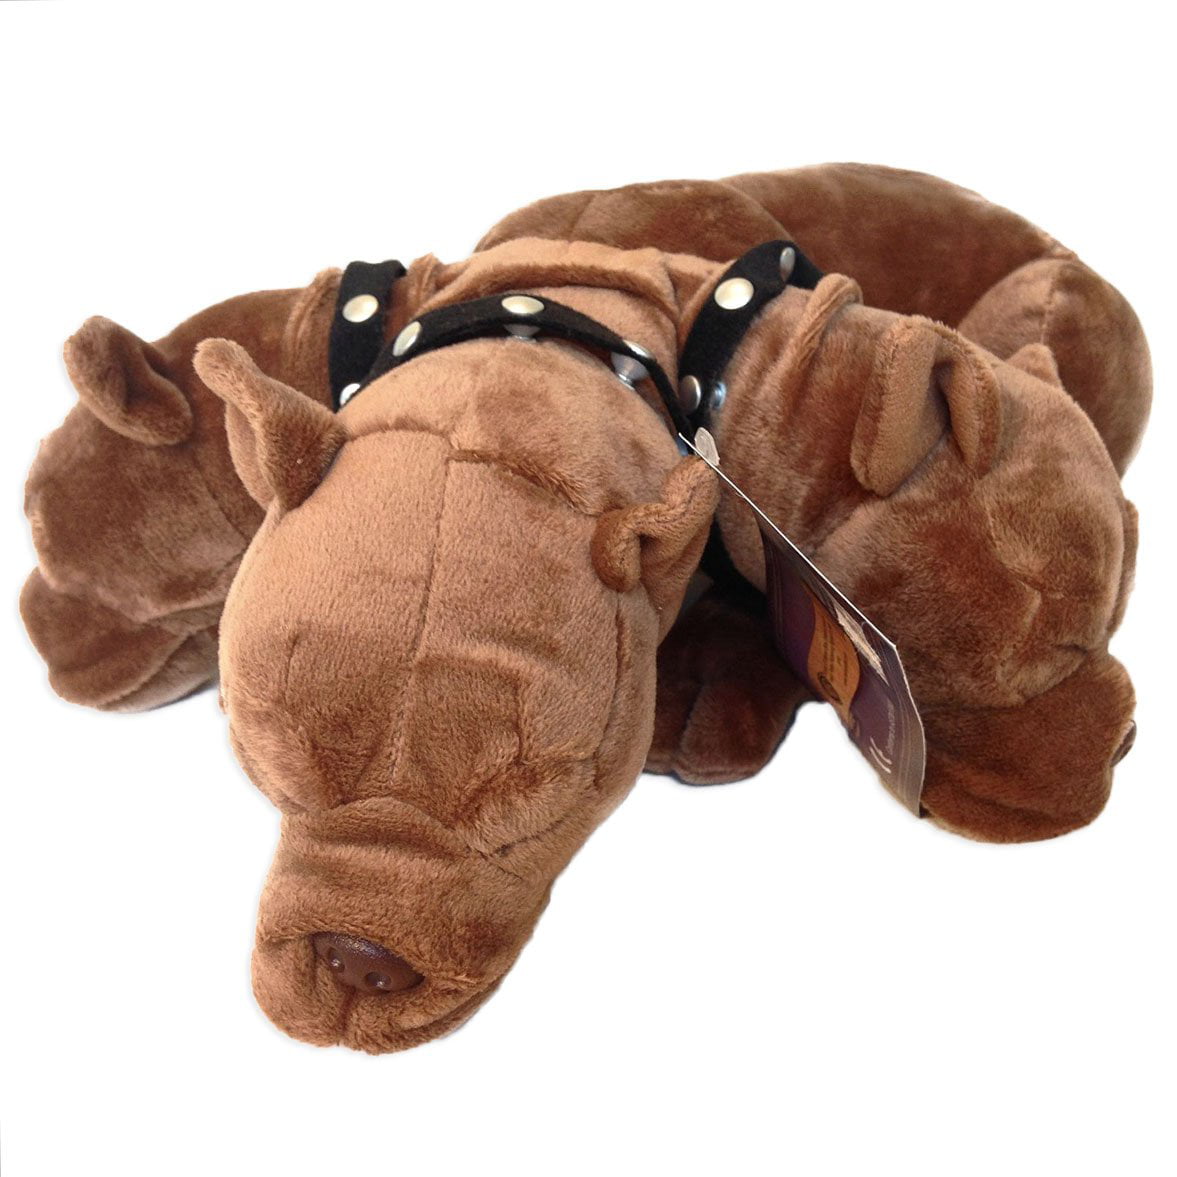 Fluffy 3 Headed Dog Spice Collar Plush Official Harry Potter 7048 GUND 2001 for sale online 